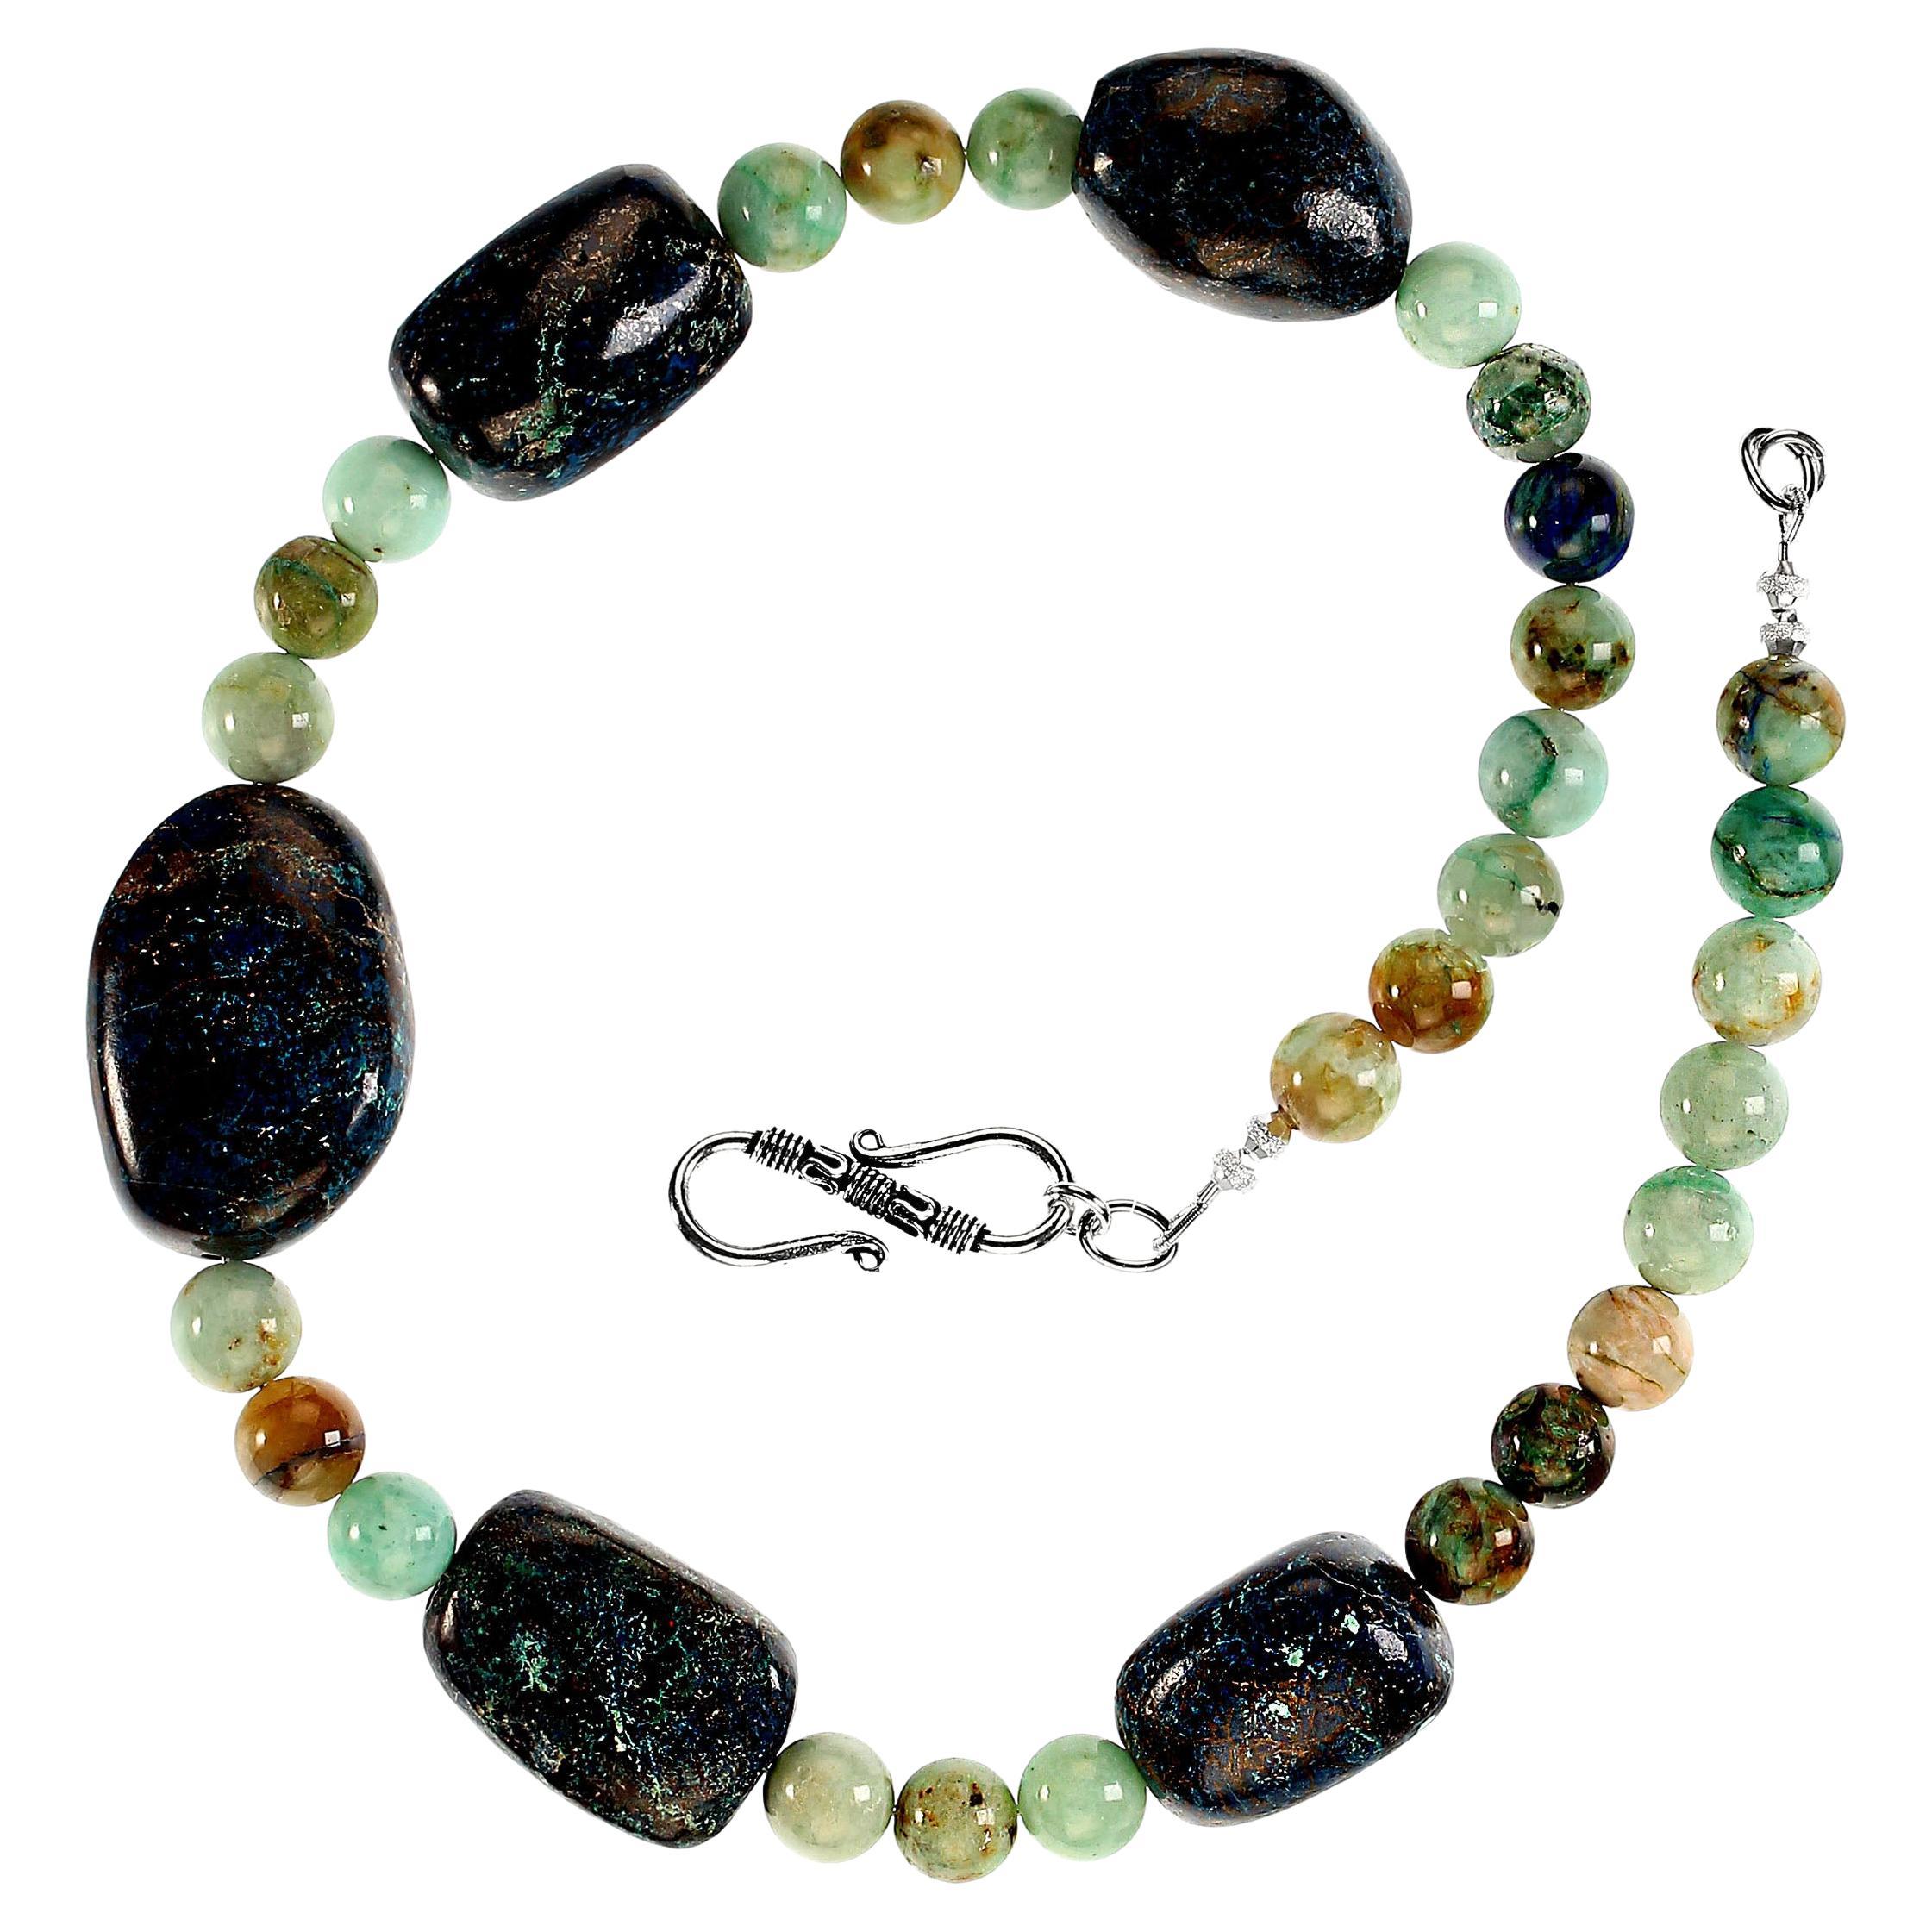 Bead AJD 19 Inch Chrysocolla Statement necklace with Gorgeous Focal pieces Great Gift For Sale